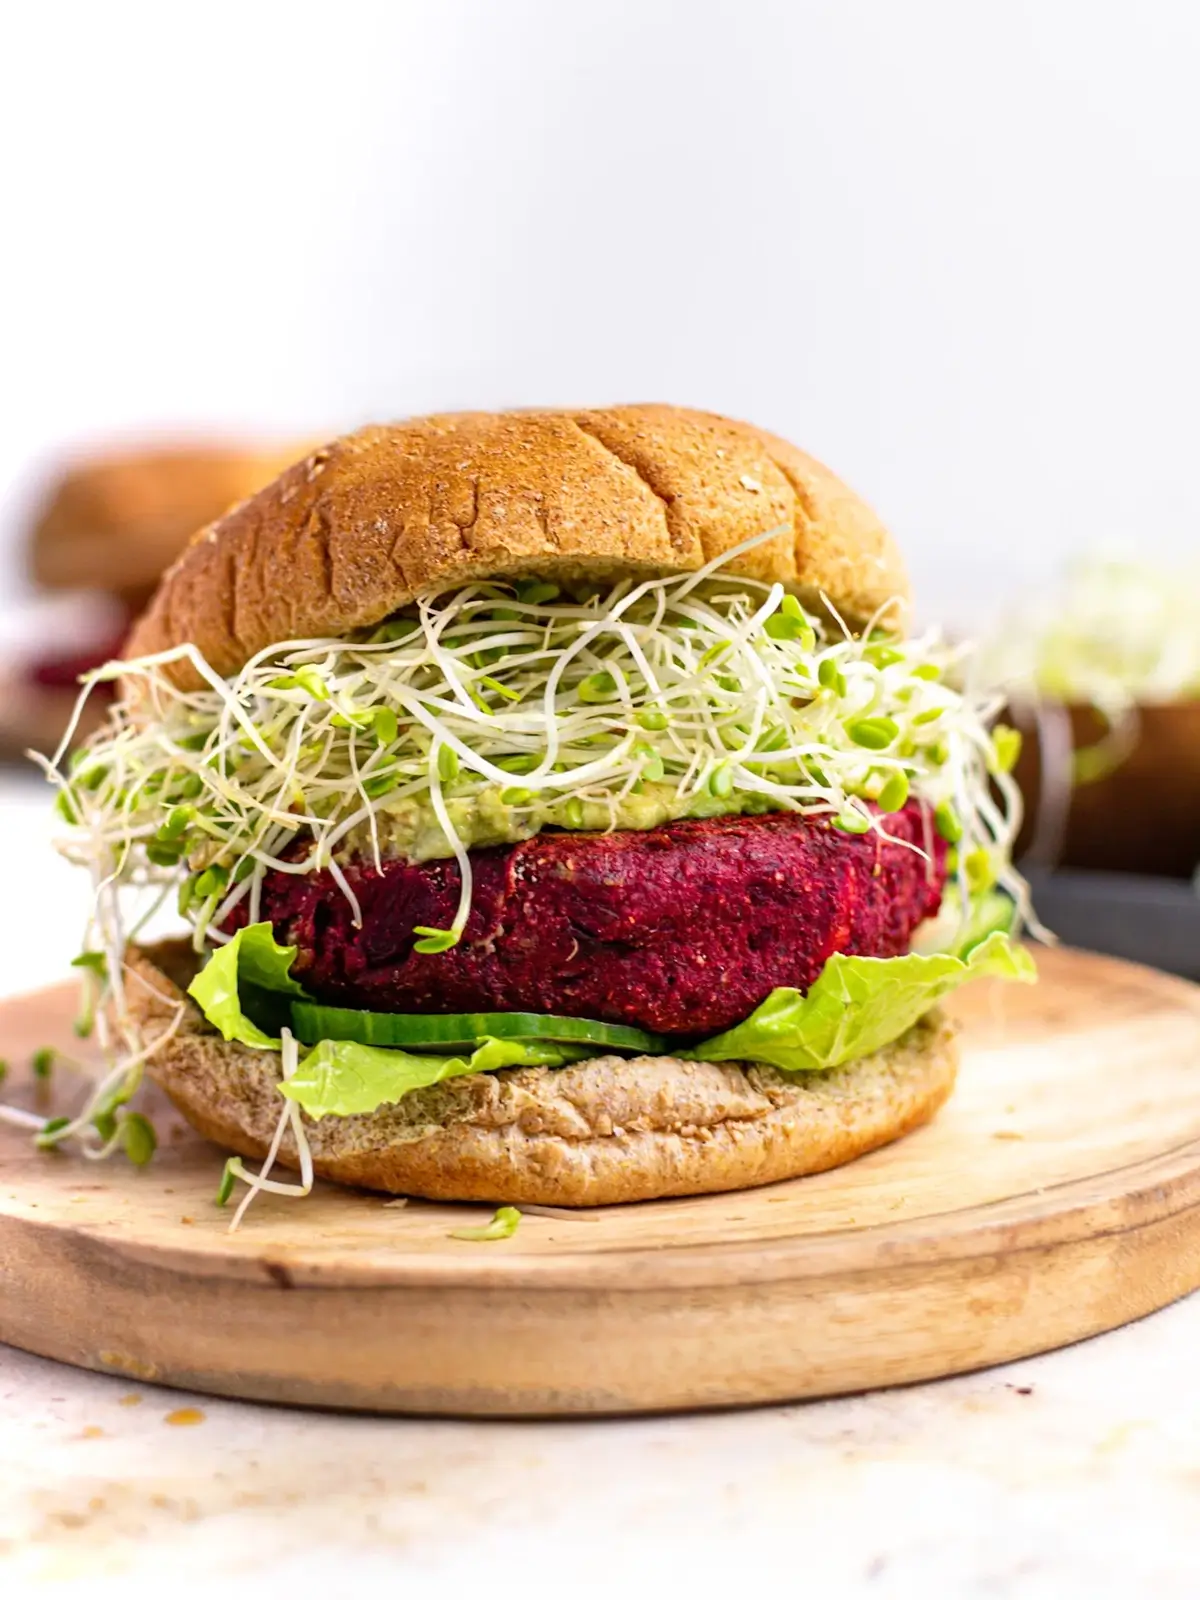 beet bruger with sprouts